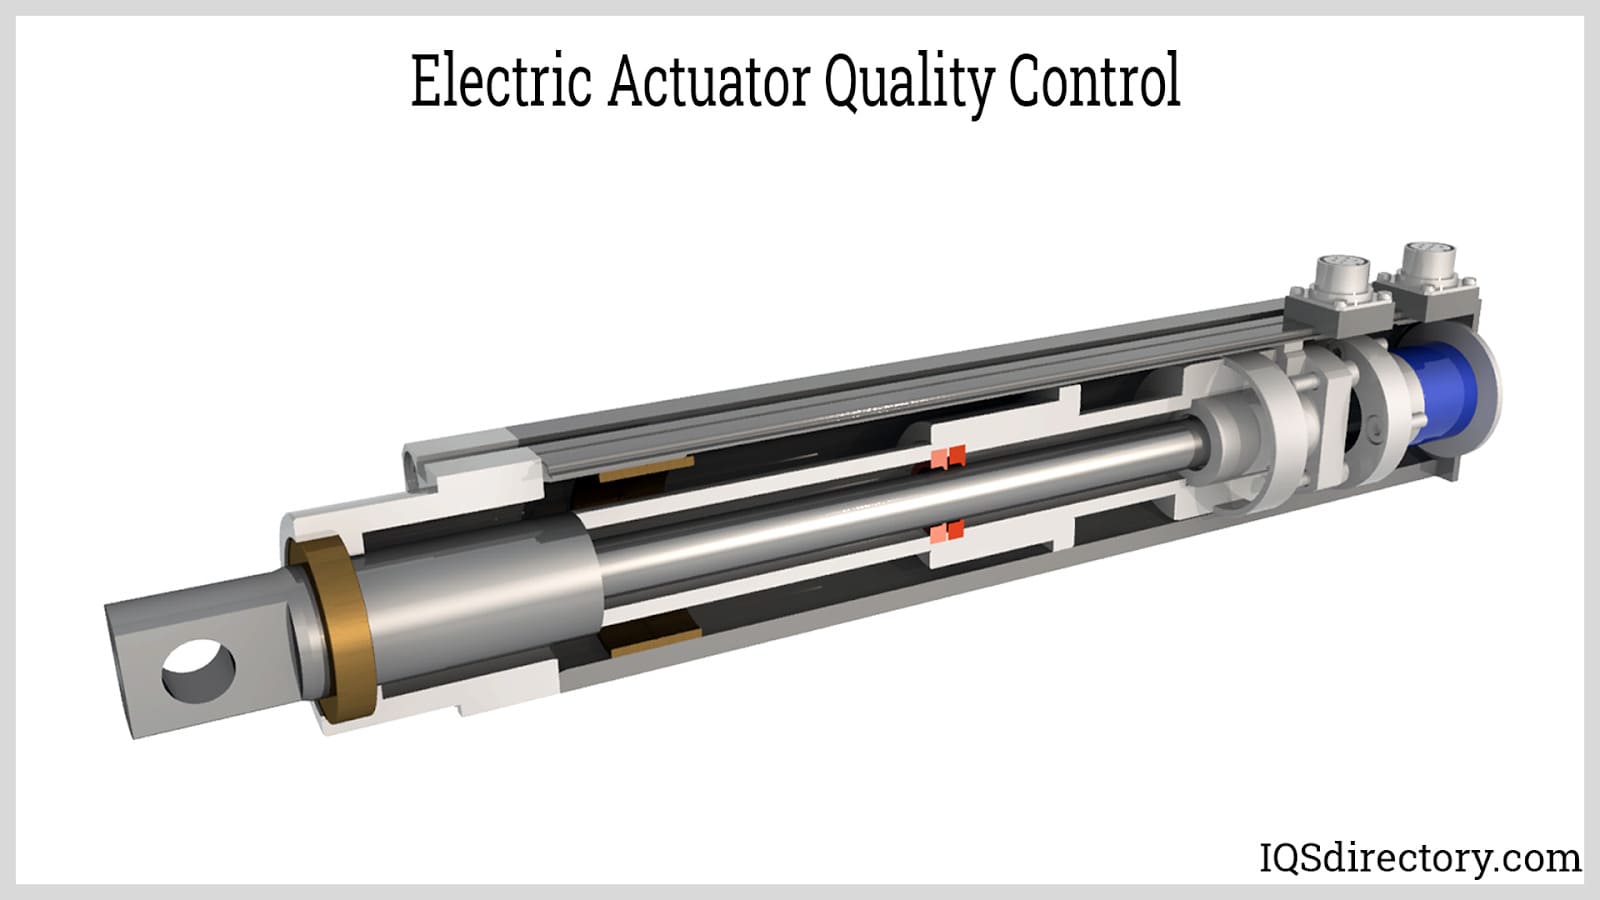 Electric Actuator Quality Control